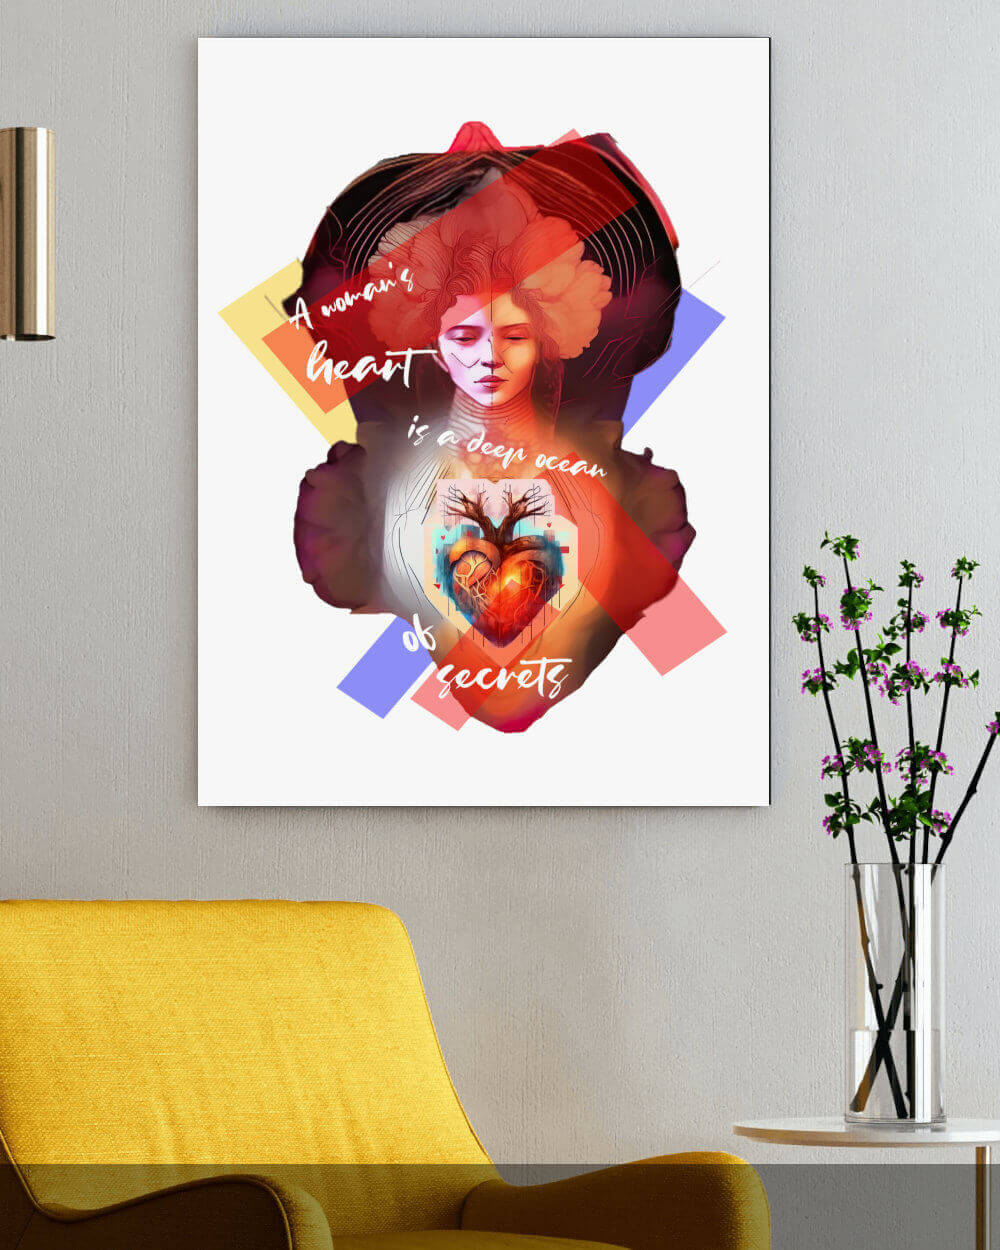 A woman's heart is a deep ocean of secrets premium quality white poster